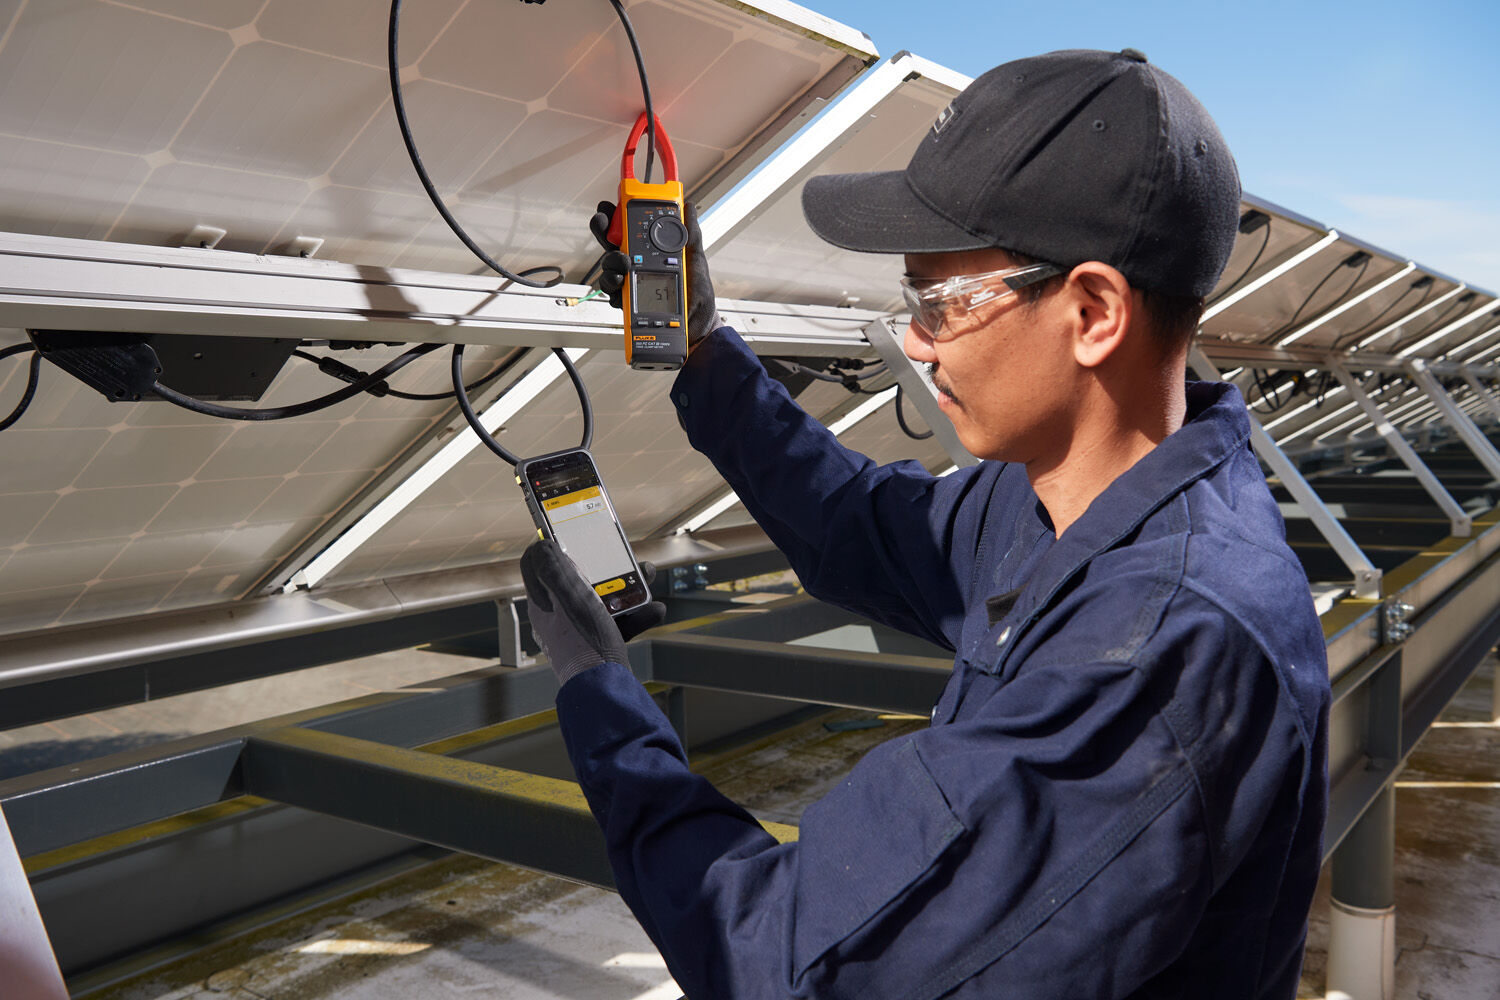 Top tips for solar installation troubleshooting using the Fluke 393 FC CAT III 1500 V Clamp Meter